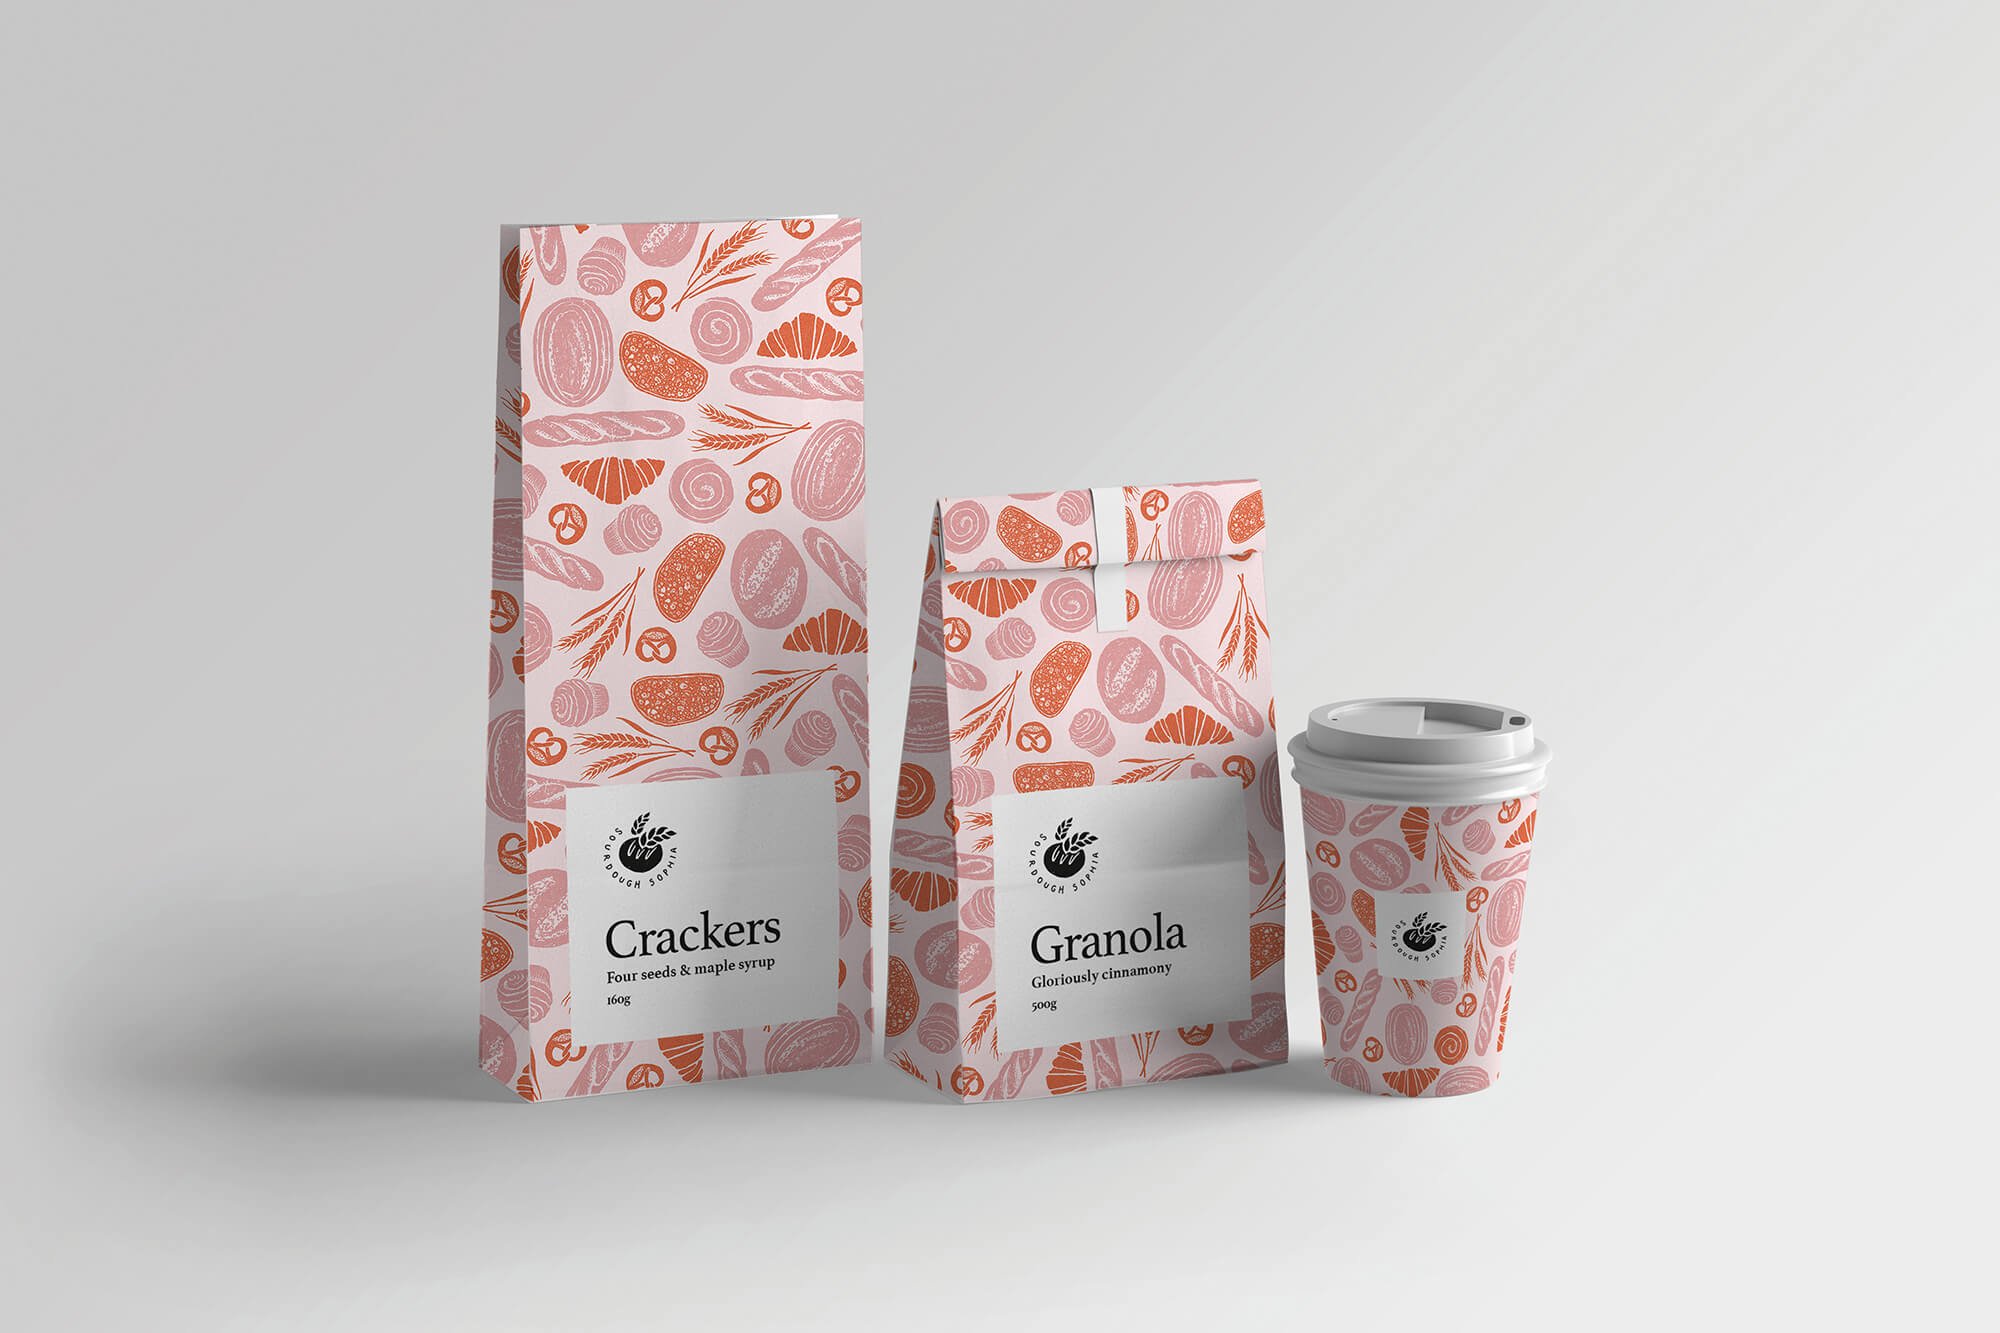  Pattern illustration for packaging for a bakery in pinks and orange with a hand drawn and textured feel. The image is of an illustrated cup design and illustrated bags. 